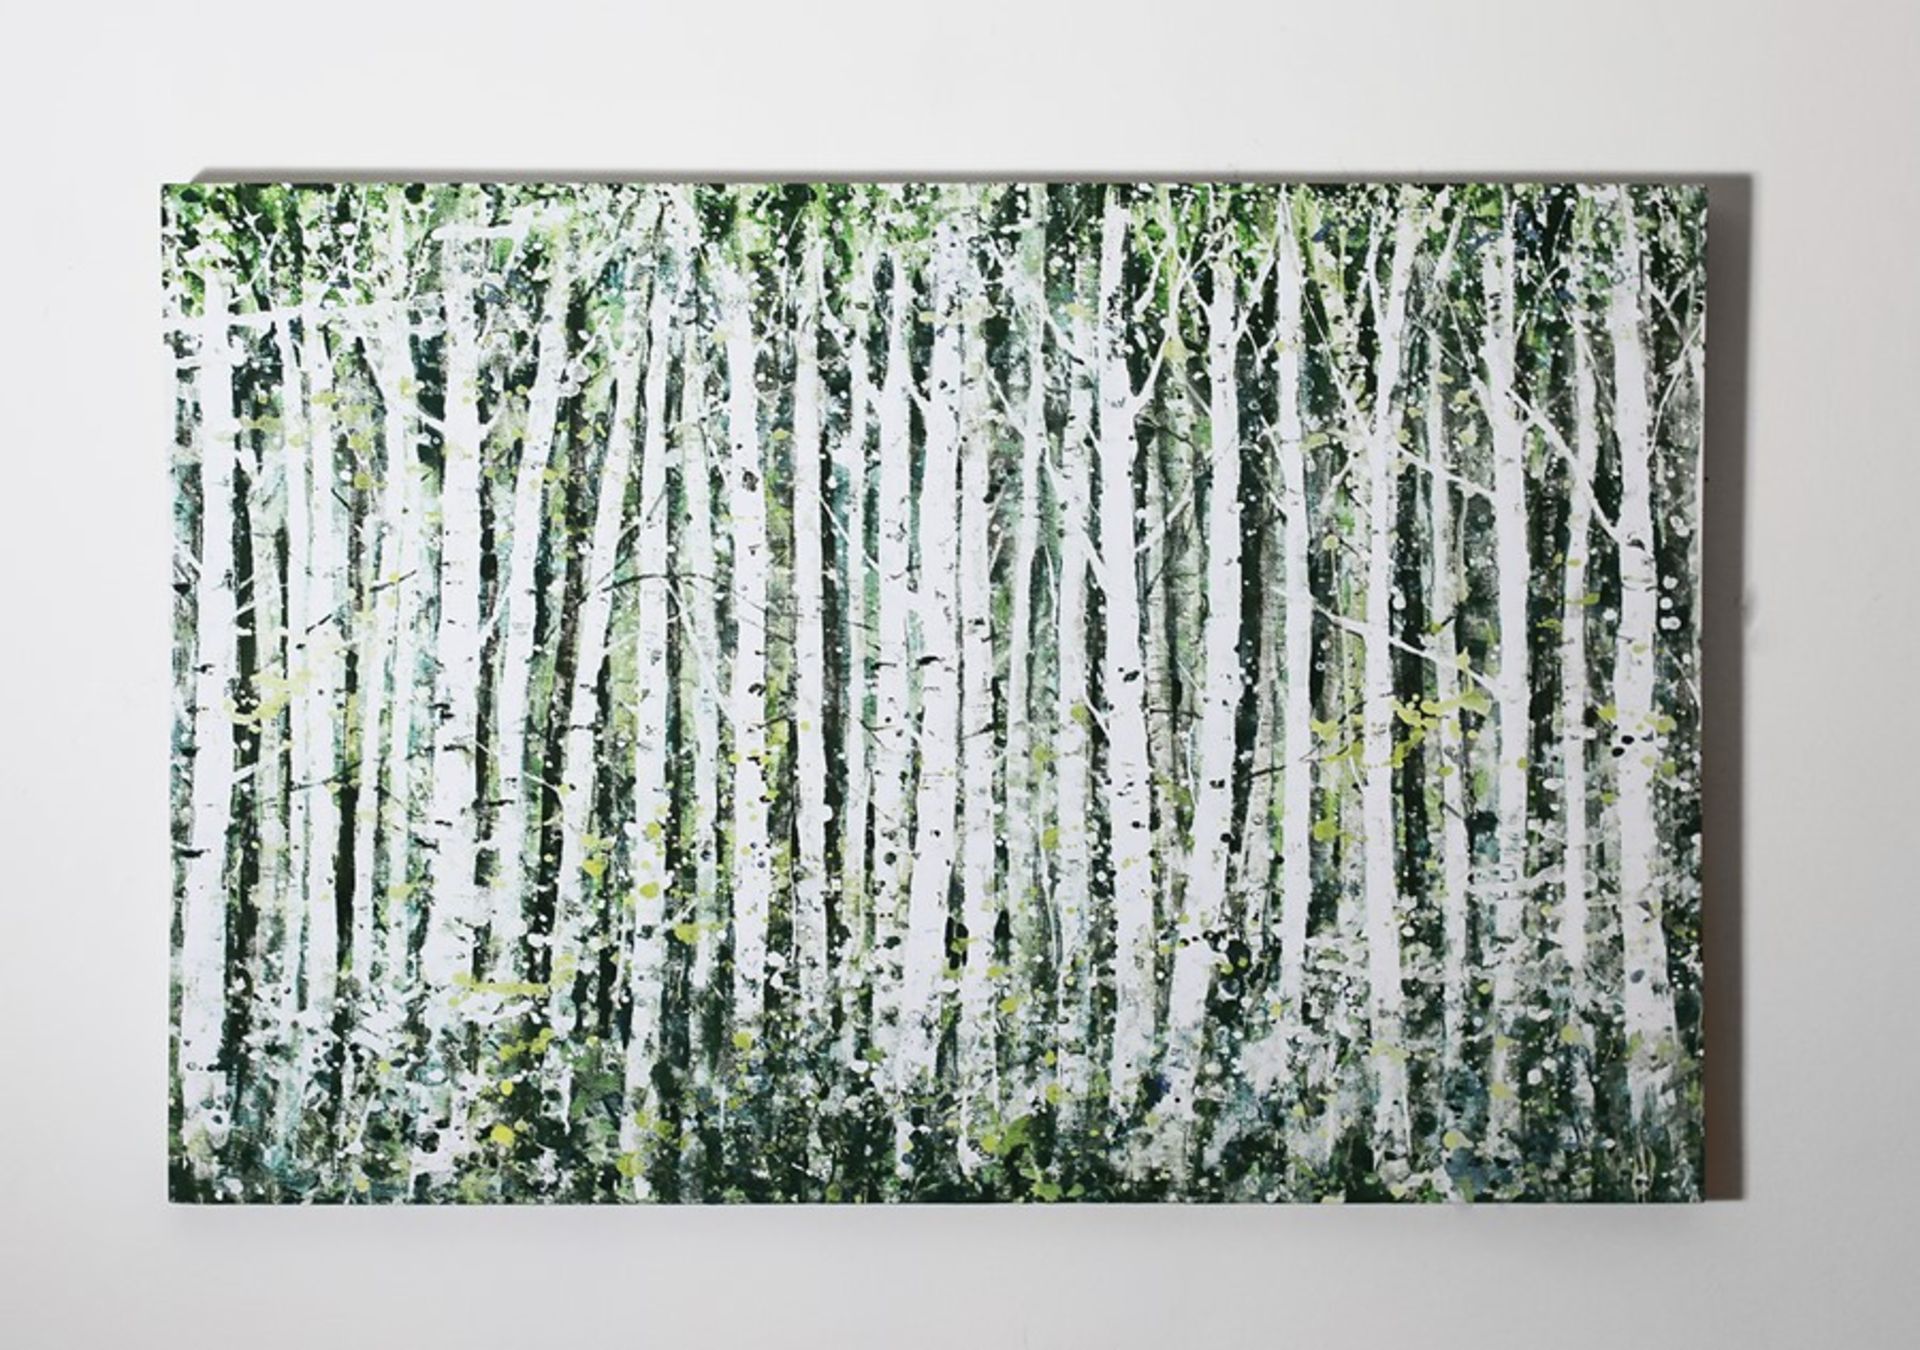 1 BRAND NEW BOXED ARTHOUSE TREES CANVAS WALL ART, 60CM X 90CM / RRP £18.99 (VIEWING HIGHLY